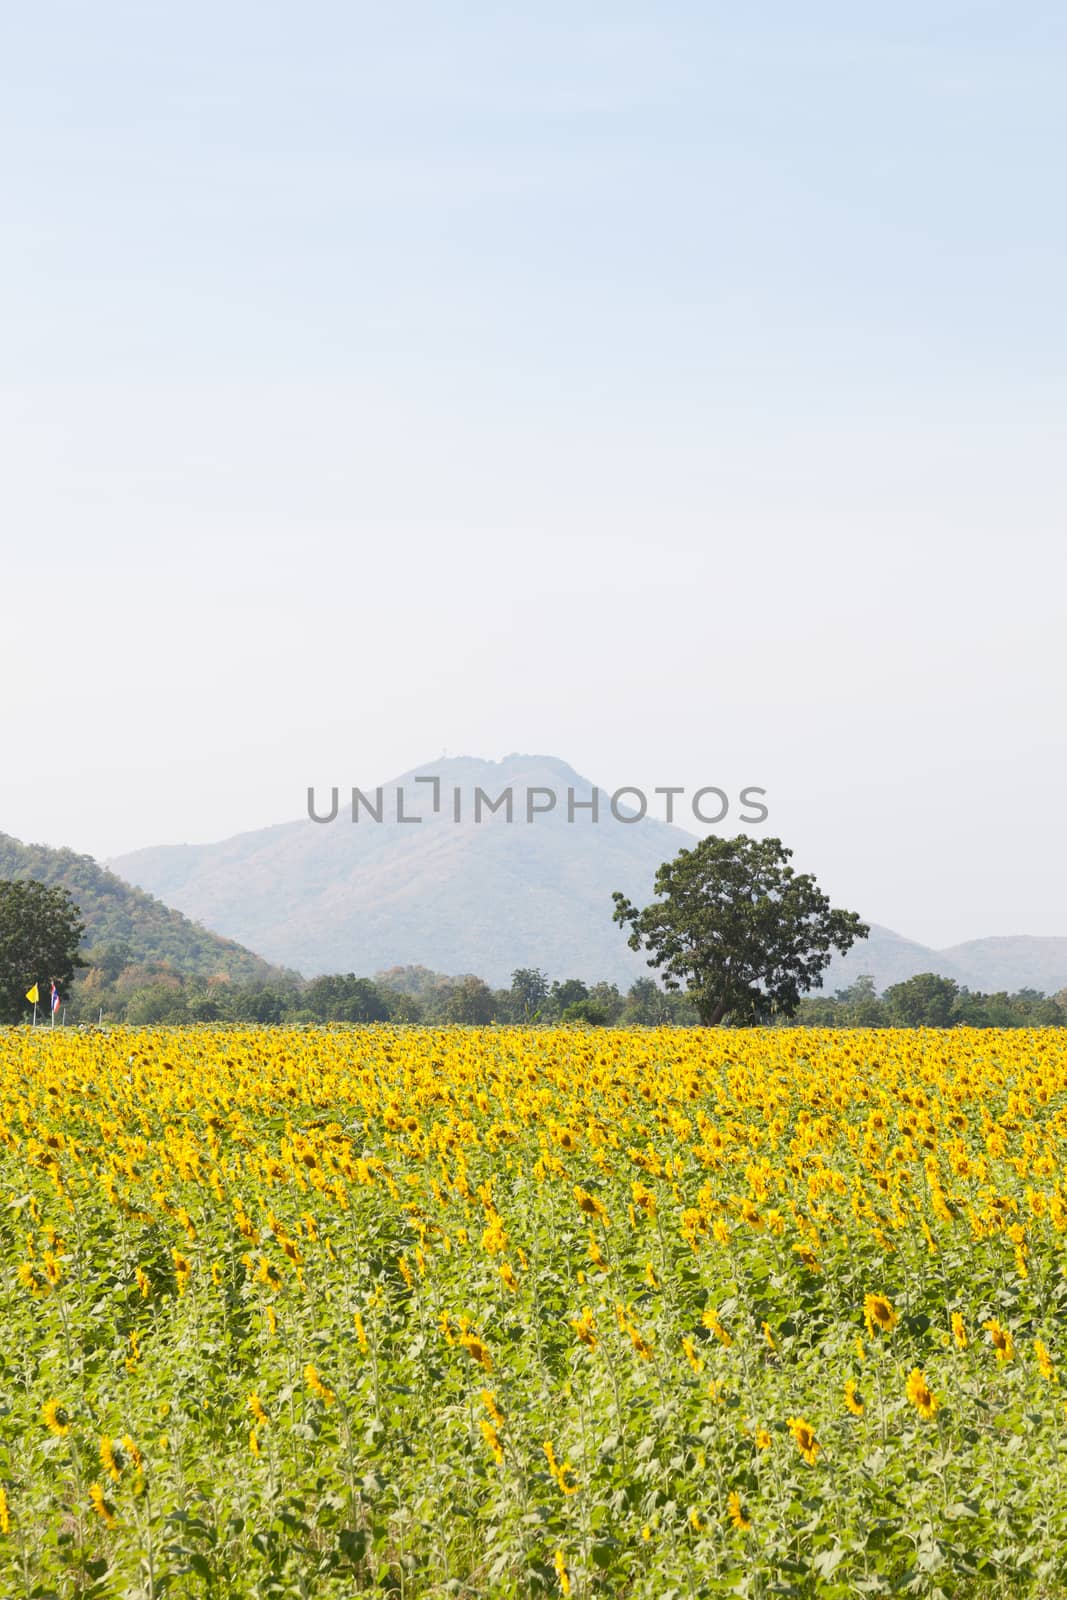 sunflower fields. Arable farming of sunflower fields. In the morning, with the back into the mountains.